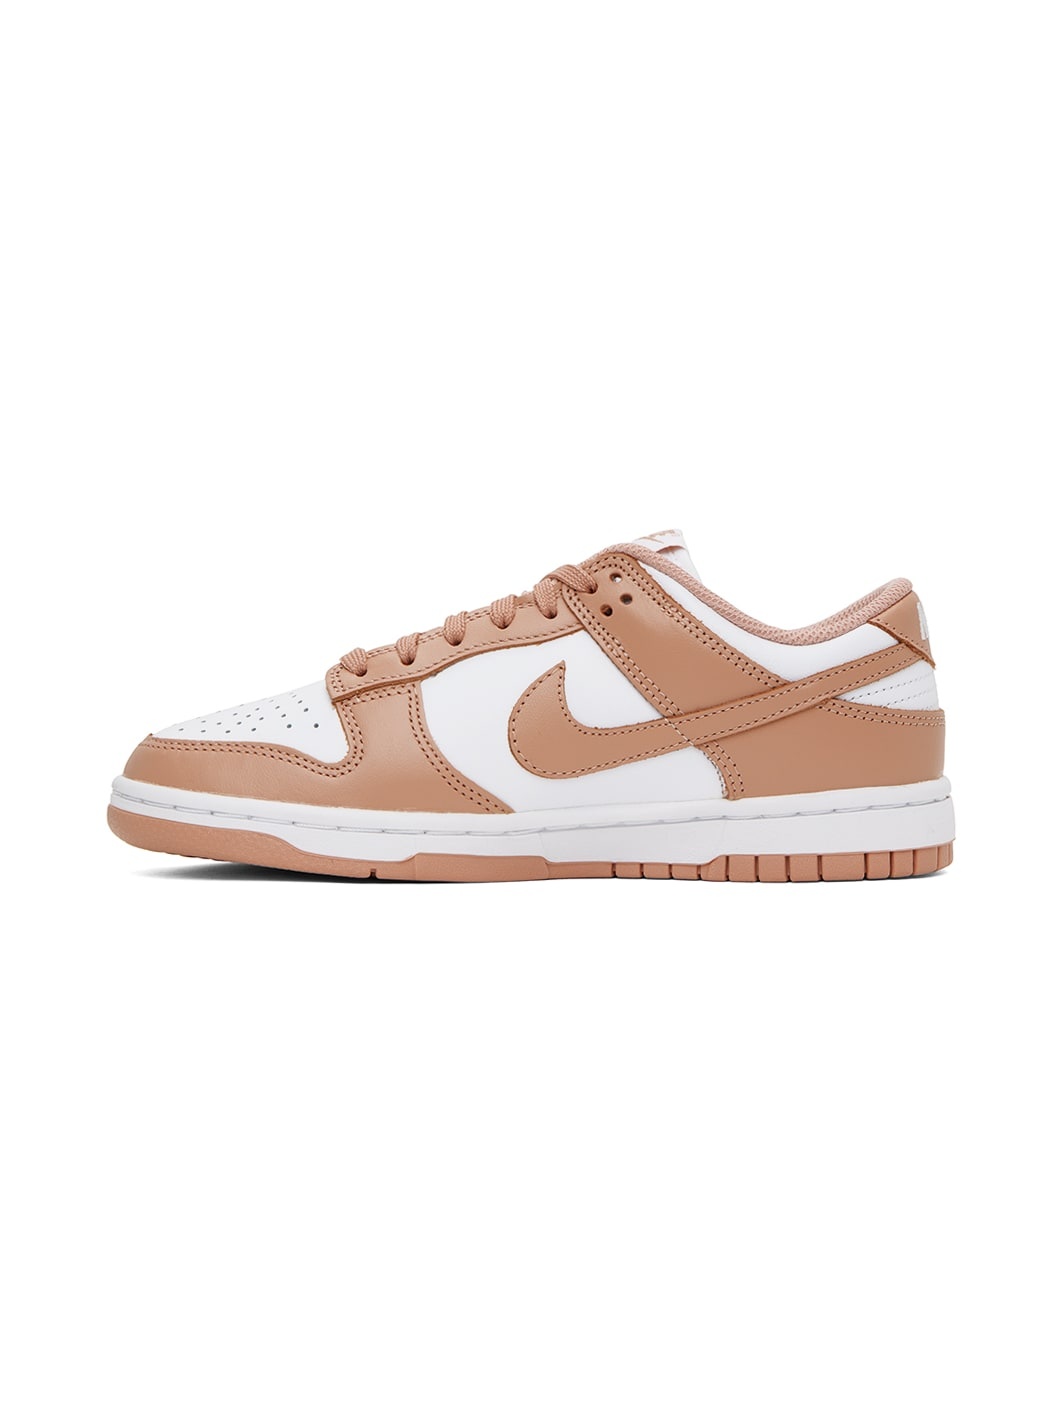 White & Beige Dunk Low By You Sneakers - 3